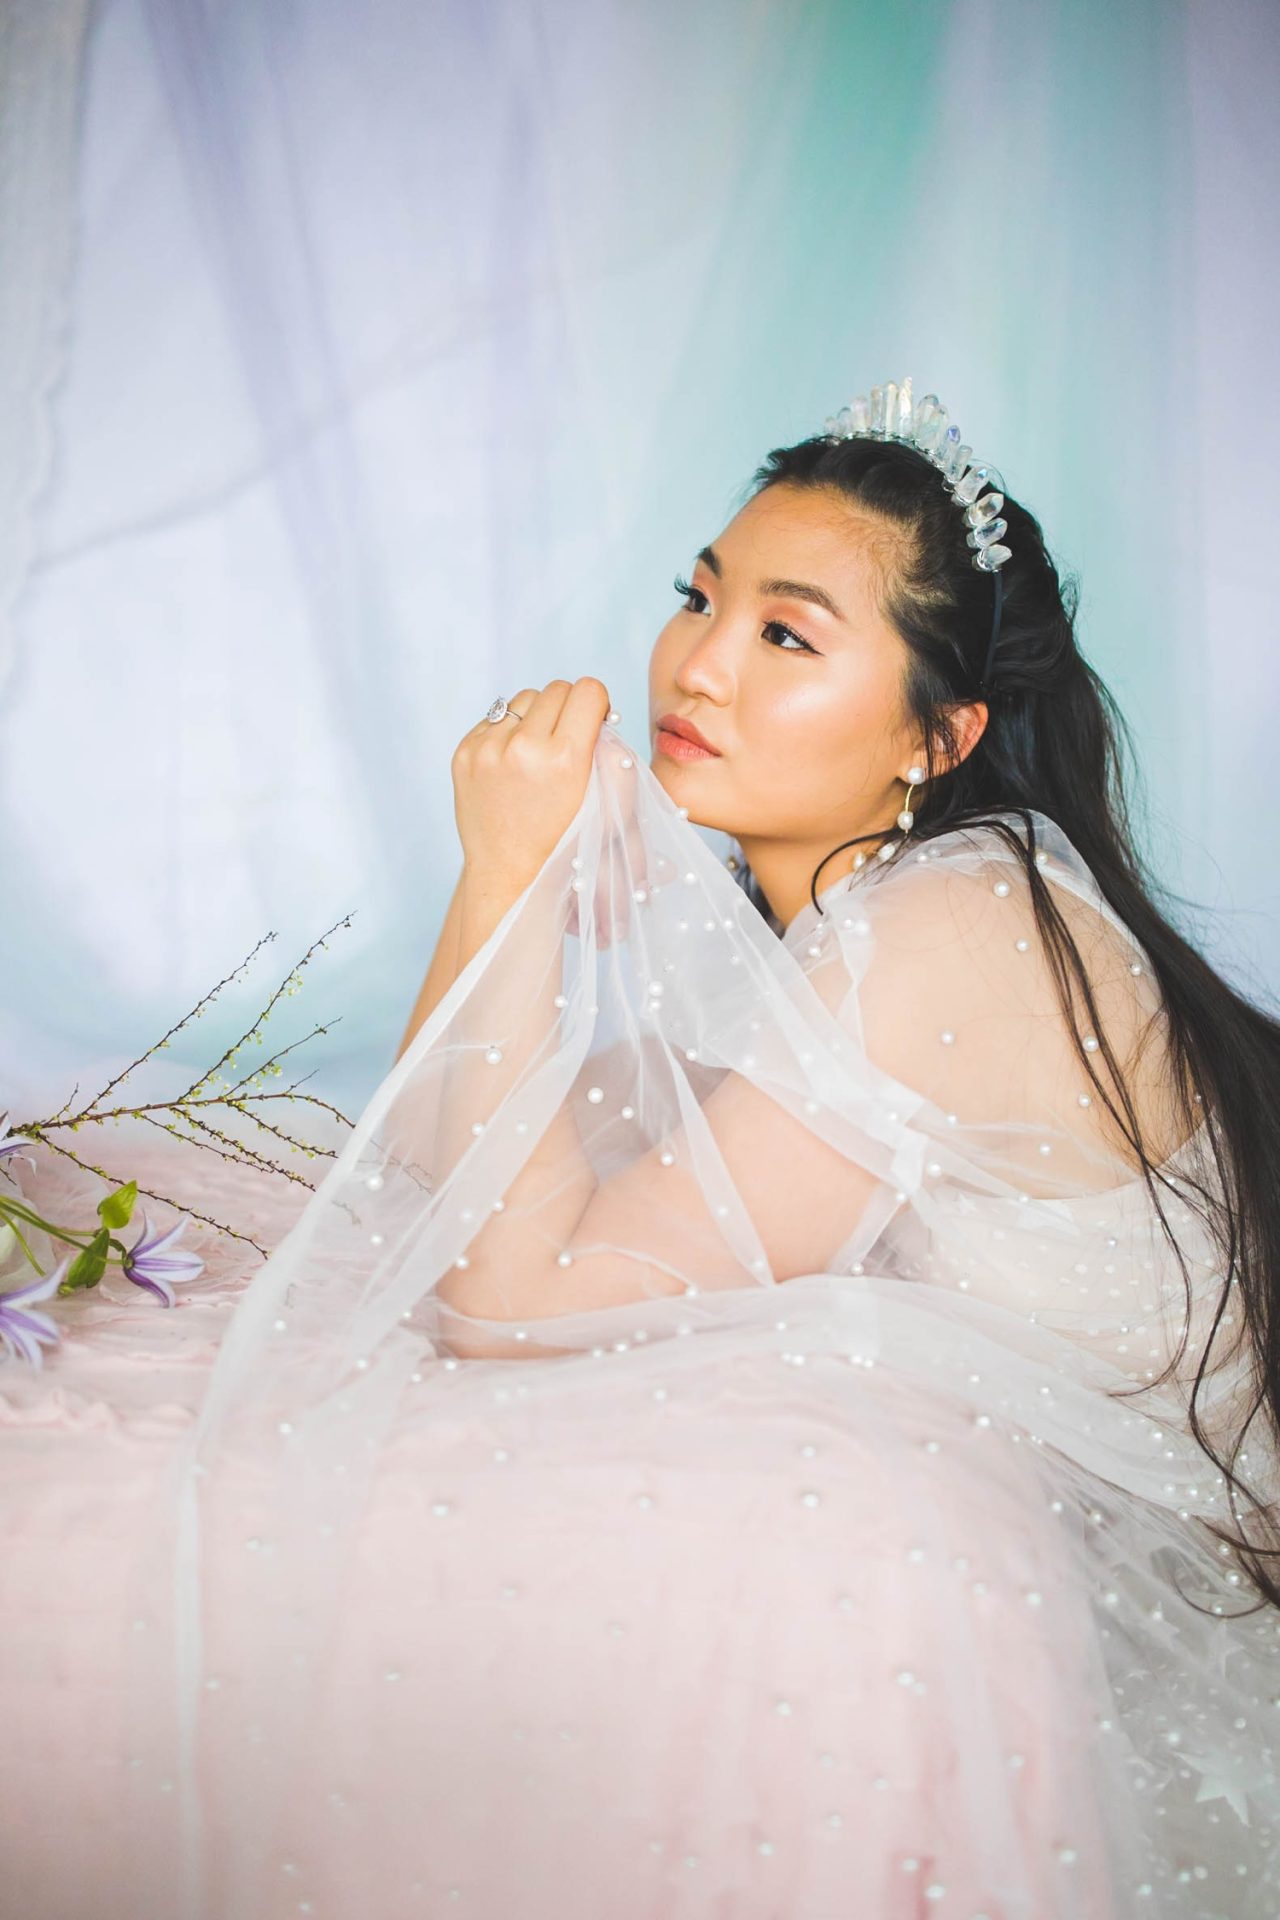 ethereal and colorful wedding photos in fayetteville, bridals taken in studio